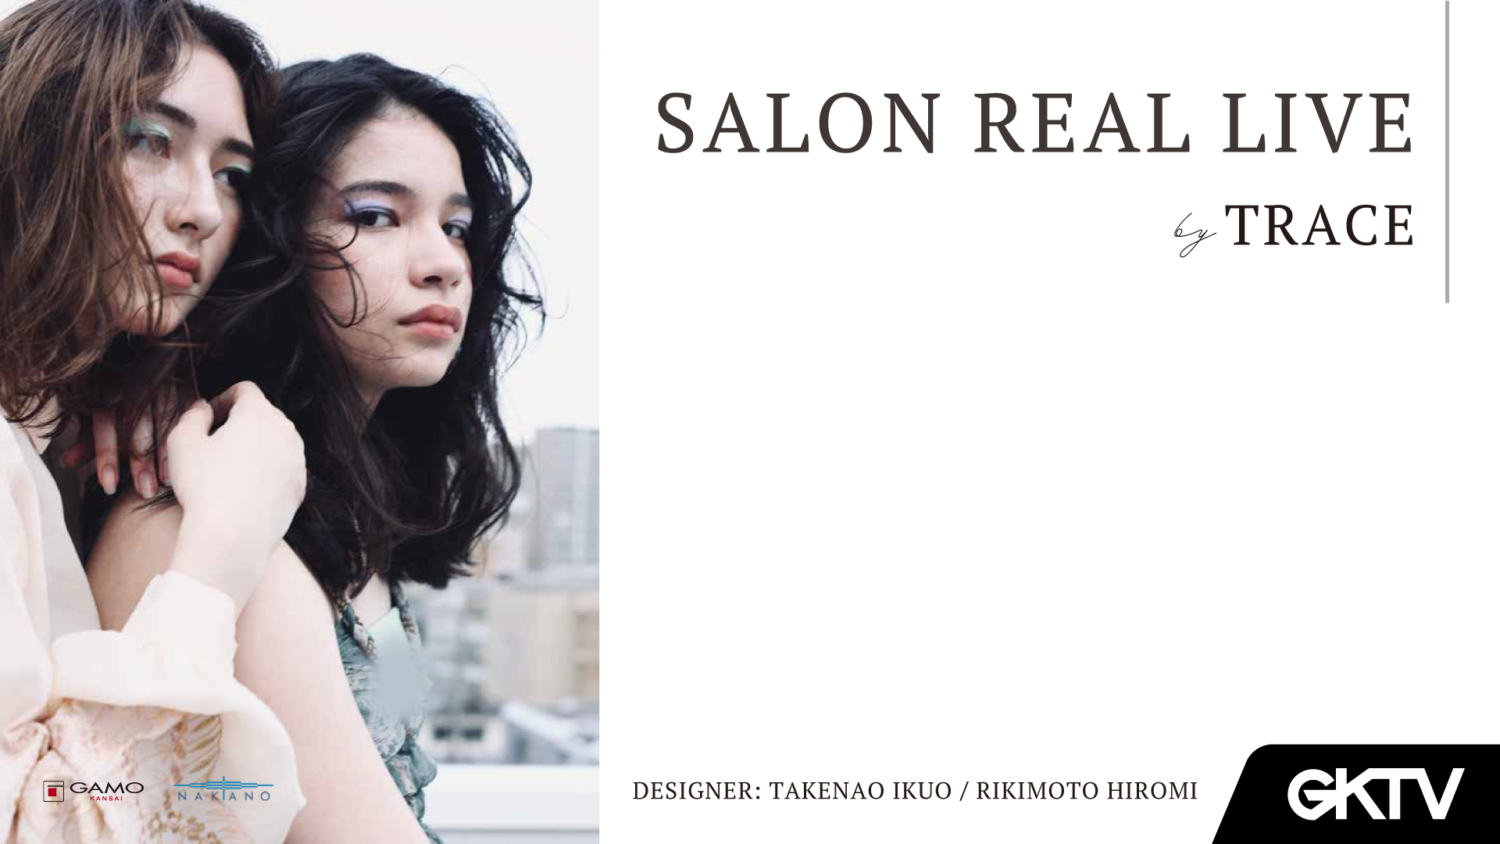 SALON REAL LIVE by TRACE